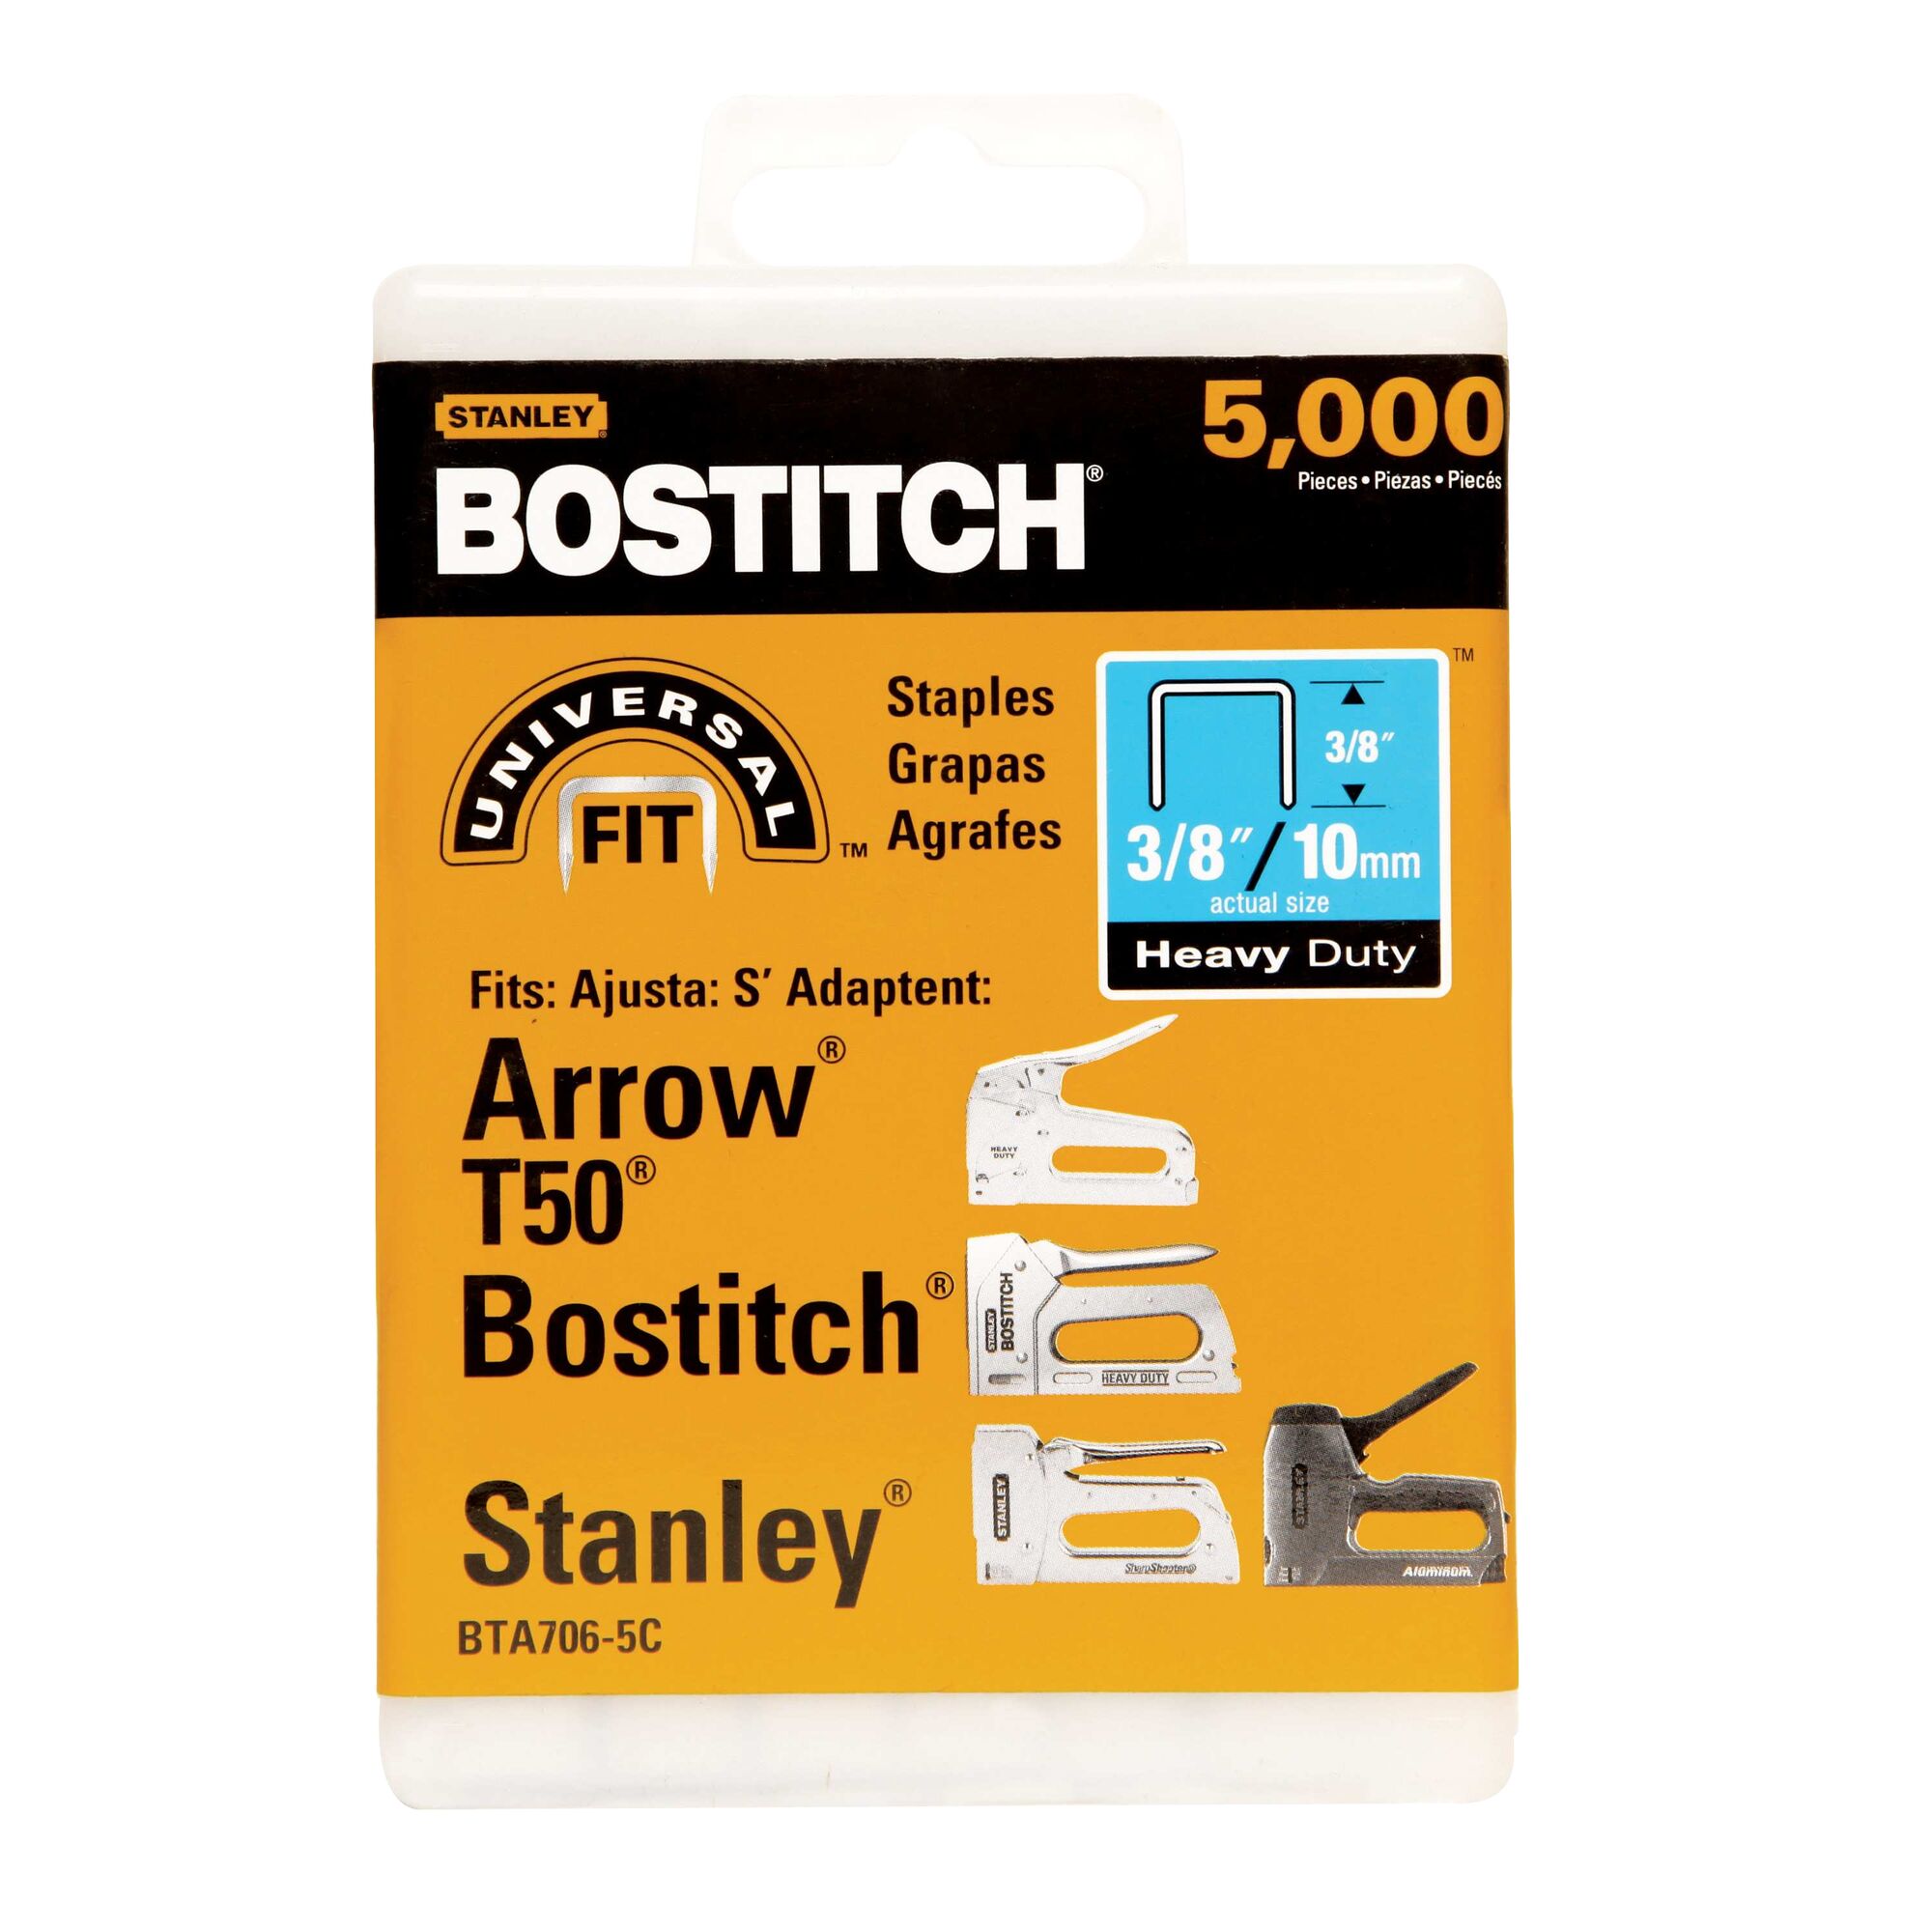 Bostitch 3/8-in Leg x 27/64-in Staples Silver department the Heavy-Duty Collated (5000-Per at Crown Narrow Box) in Staples